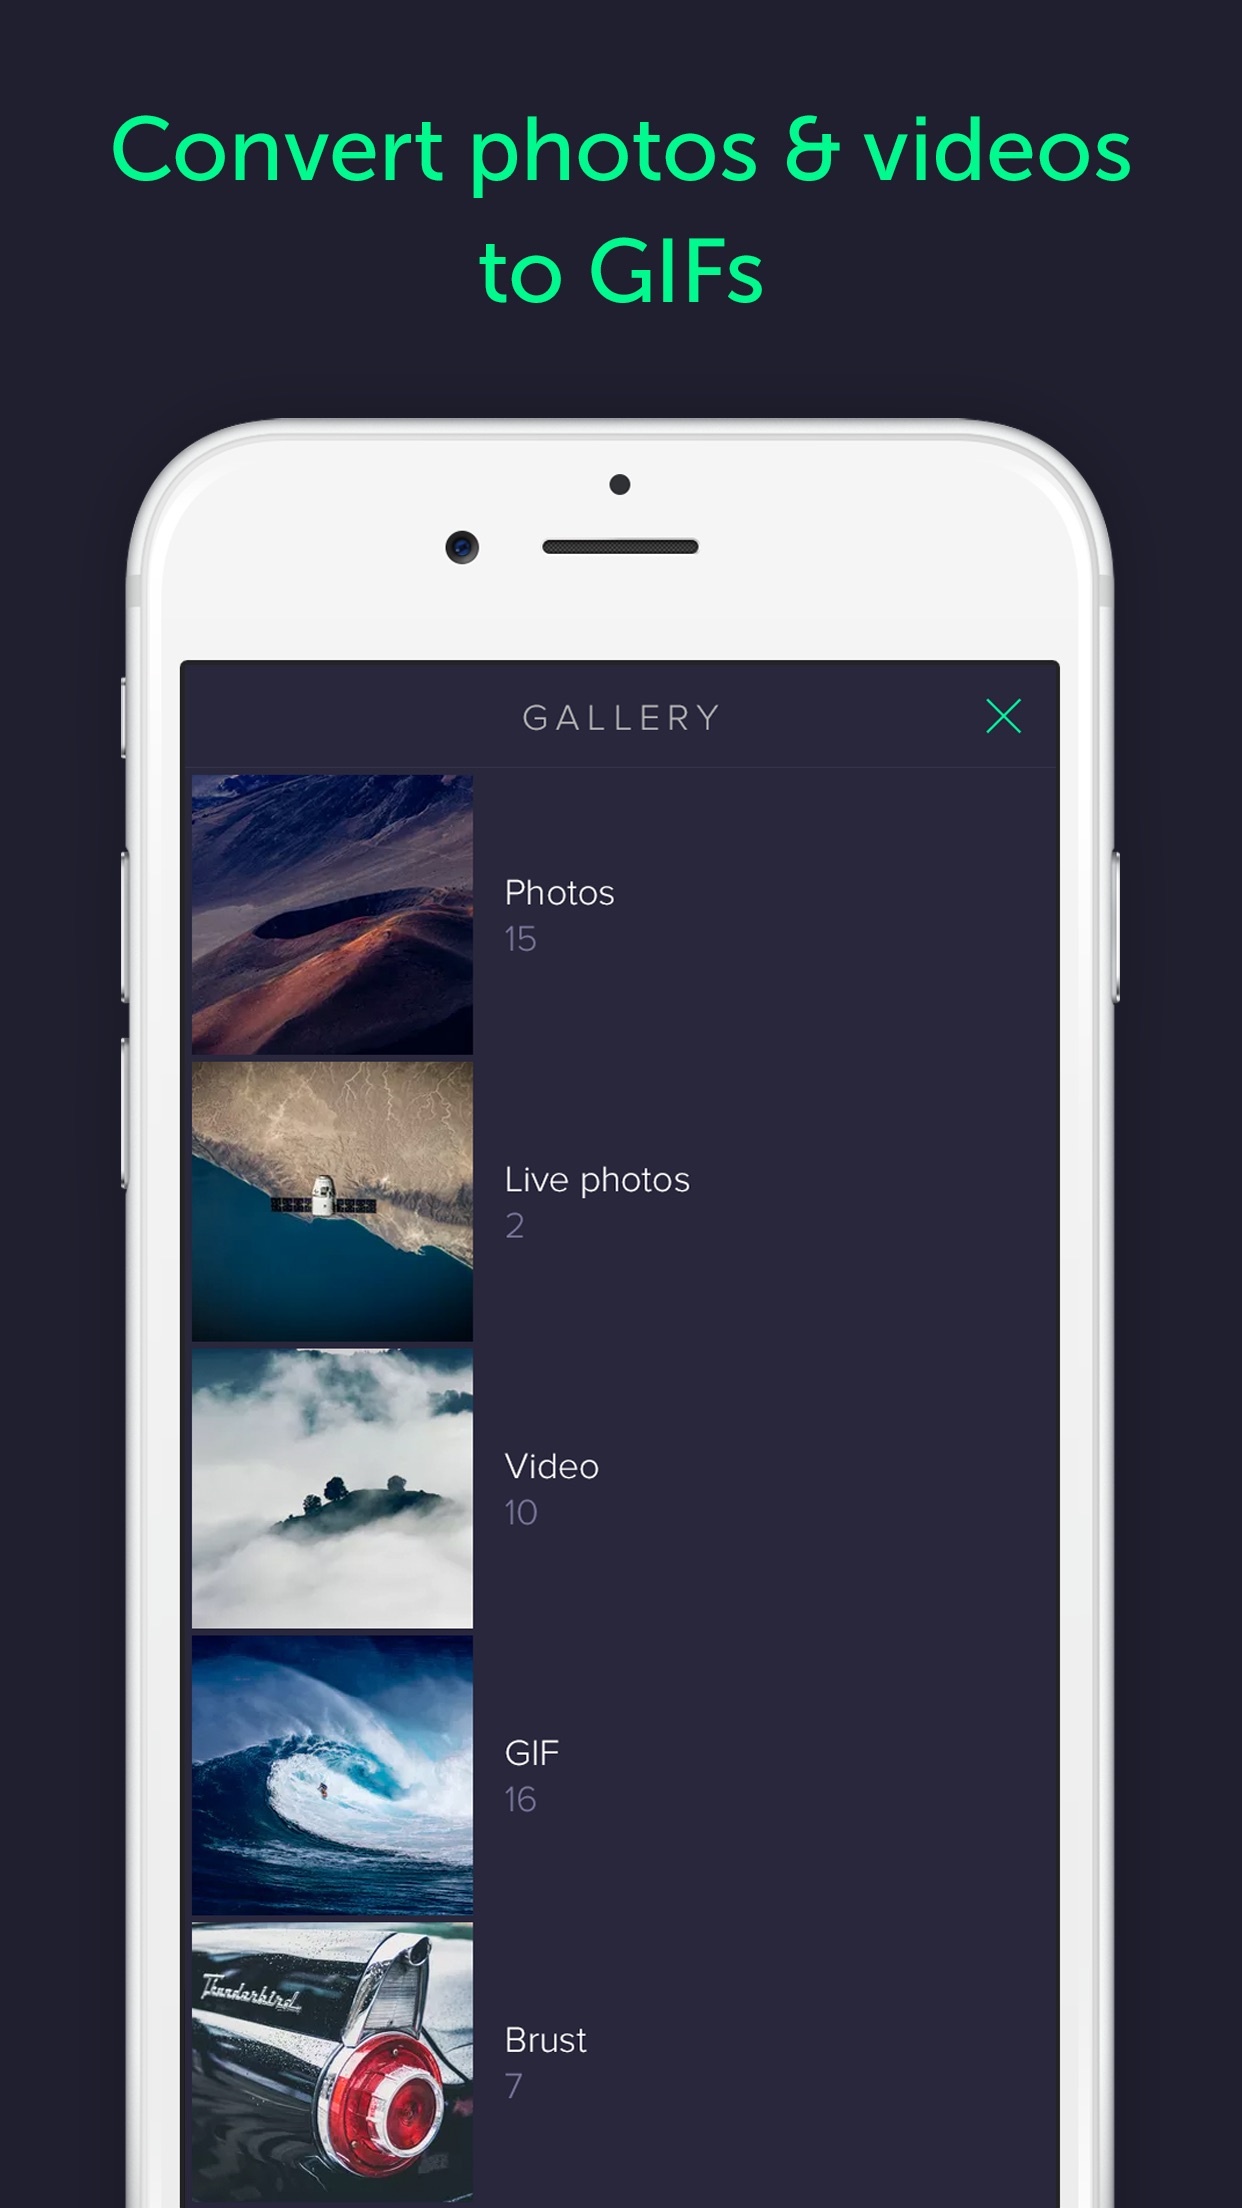 Screenshot do app Gifstory - GIF Camera, Editor and Converter of Photo, Live Photo, and Video to GIF